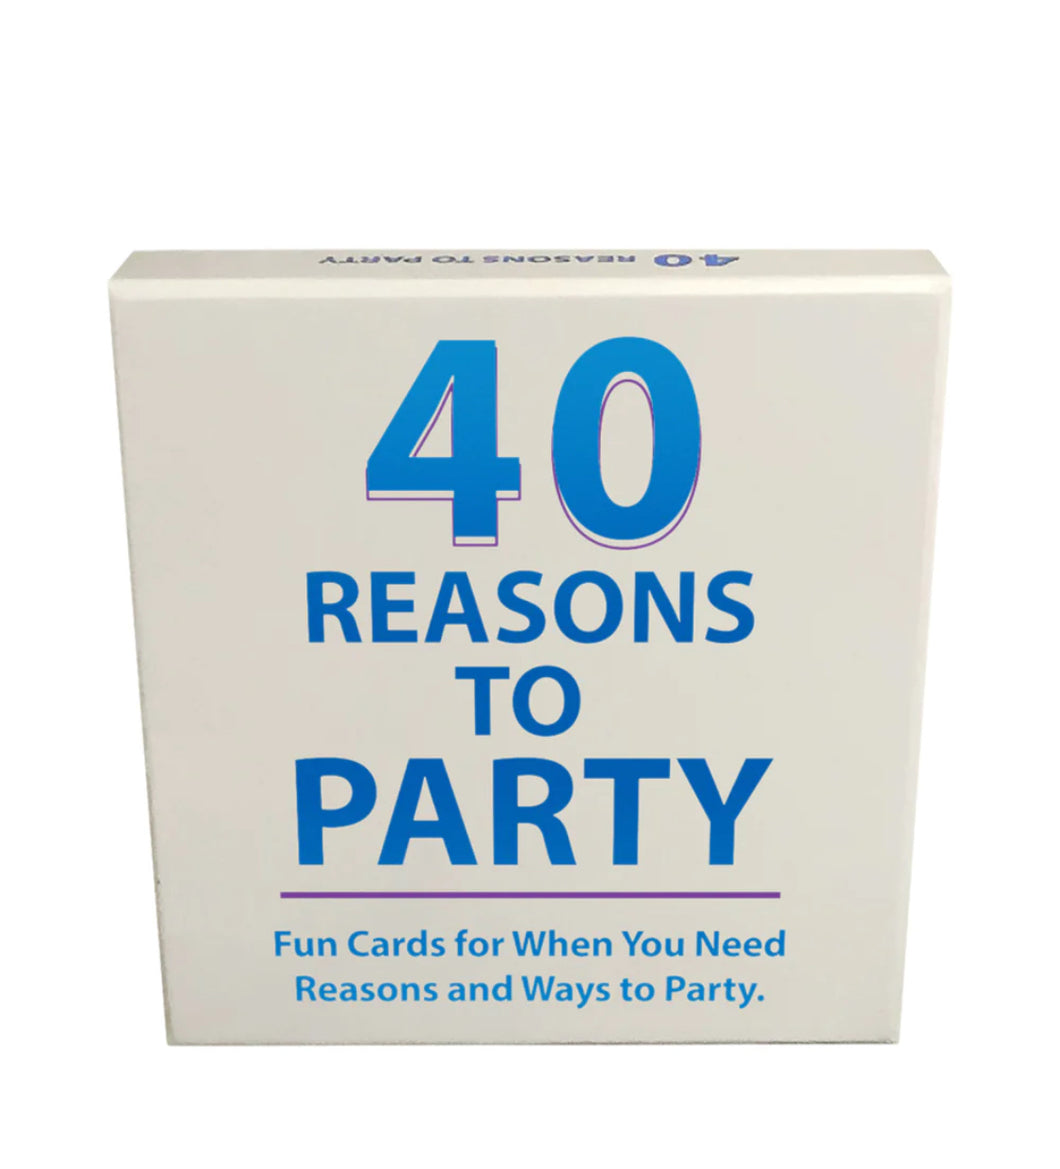 40 reasons to party! Partying is Fun! Just Do It!